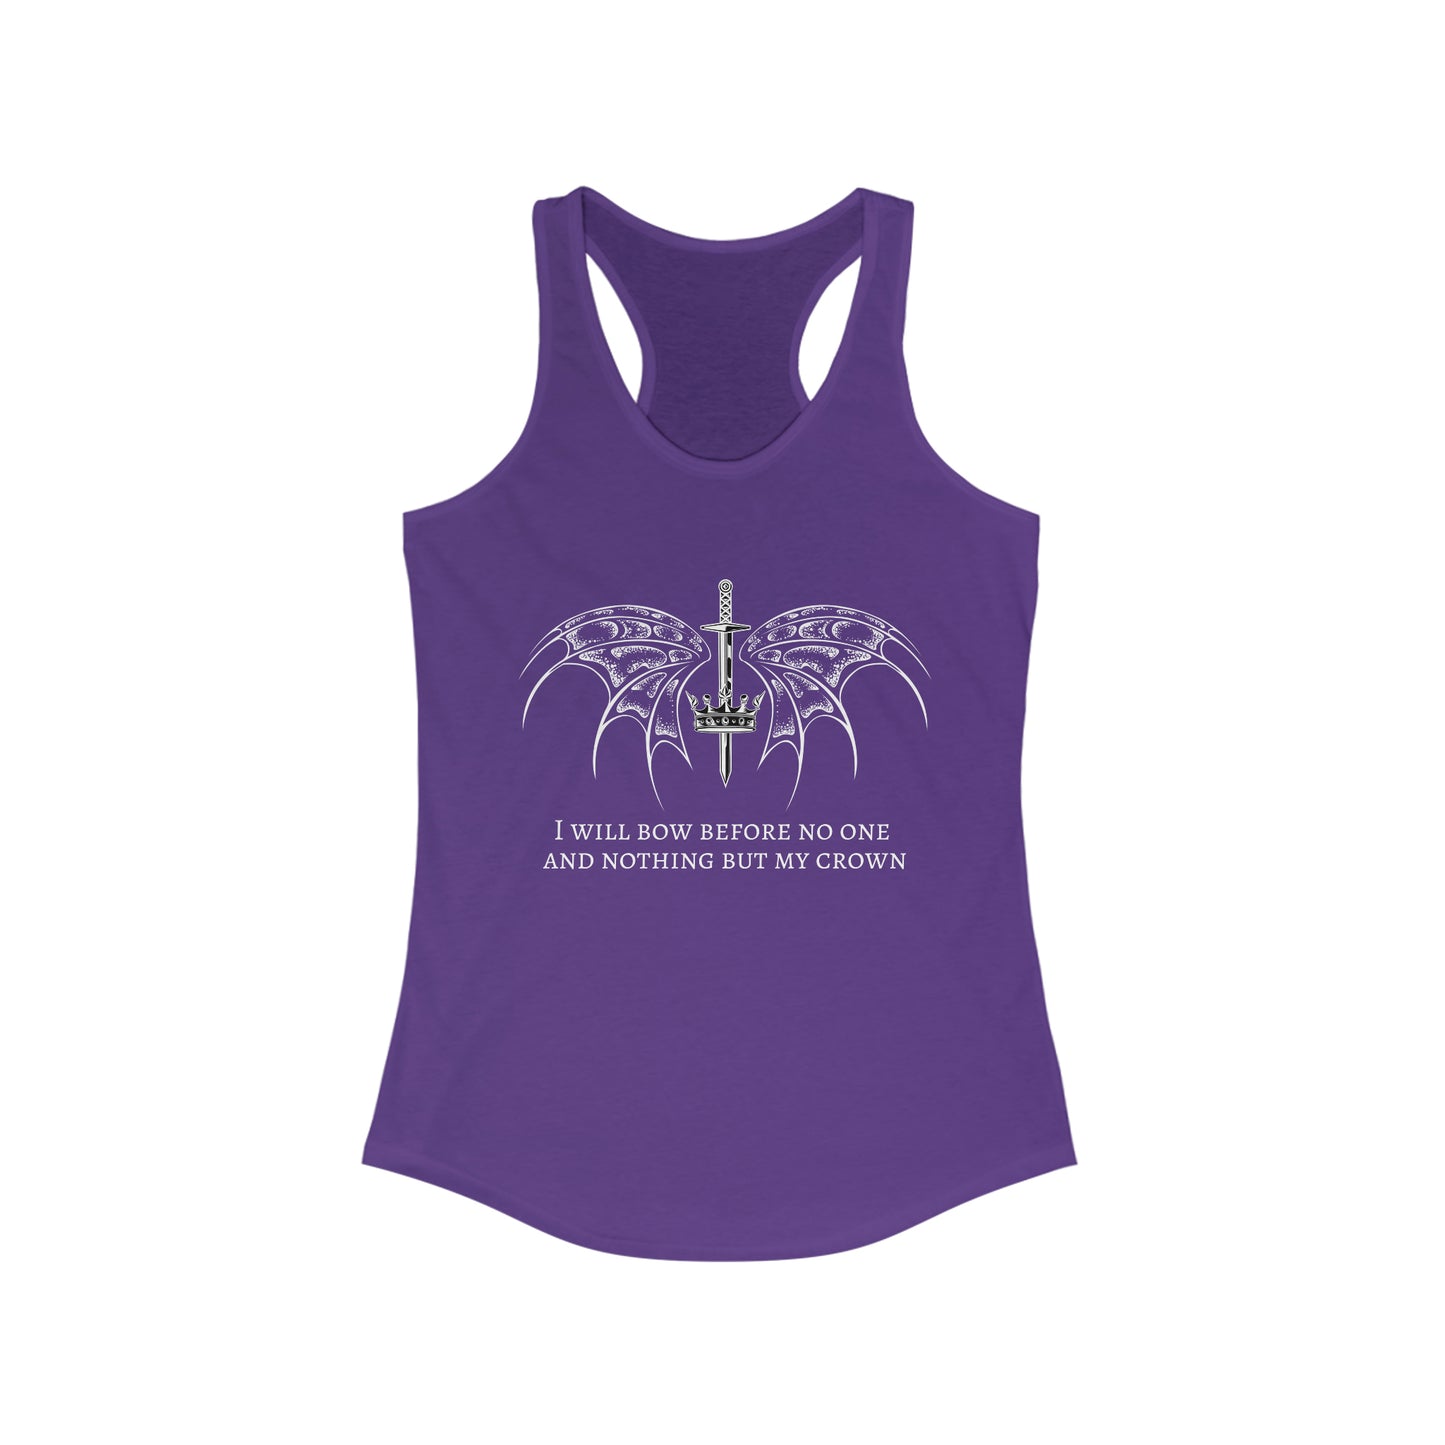 Bow to no one Racerback Tank